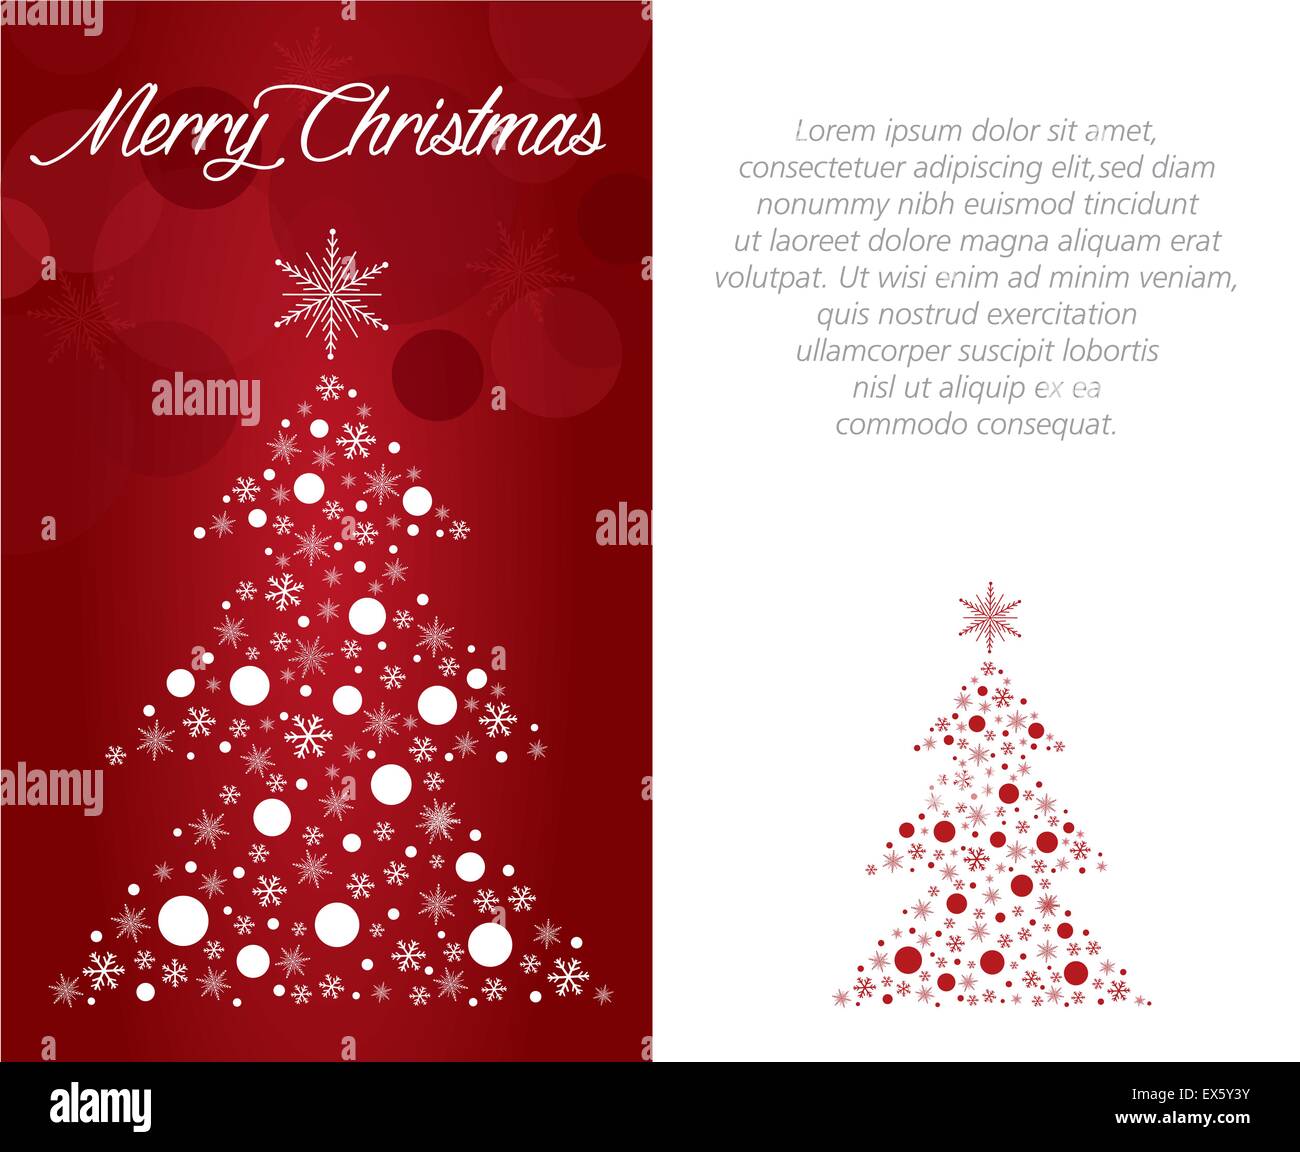 merry christmas greeting card illustration Stock Vector